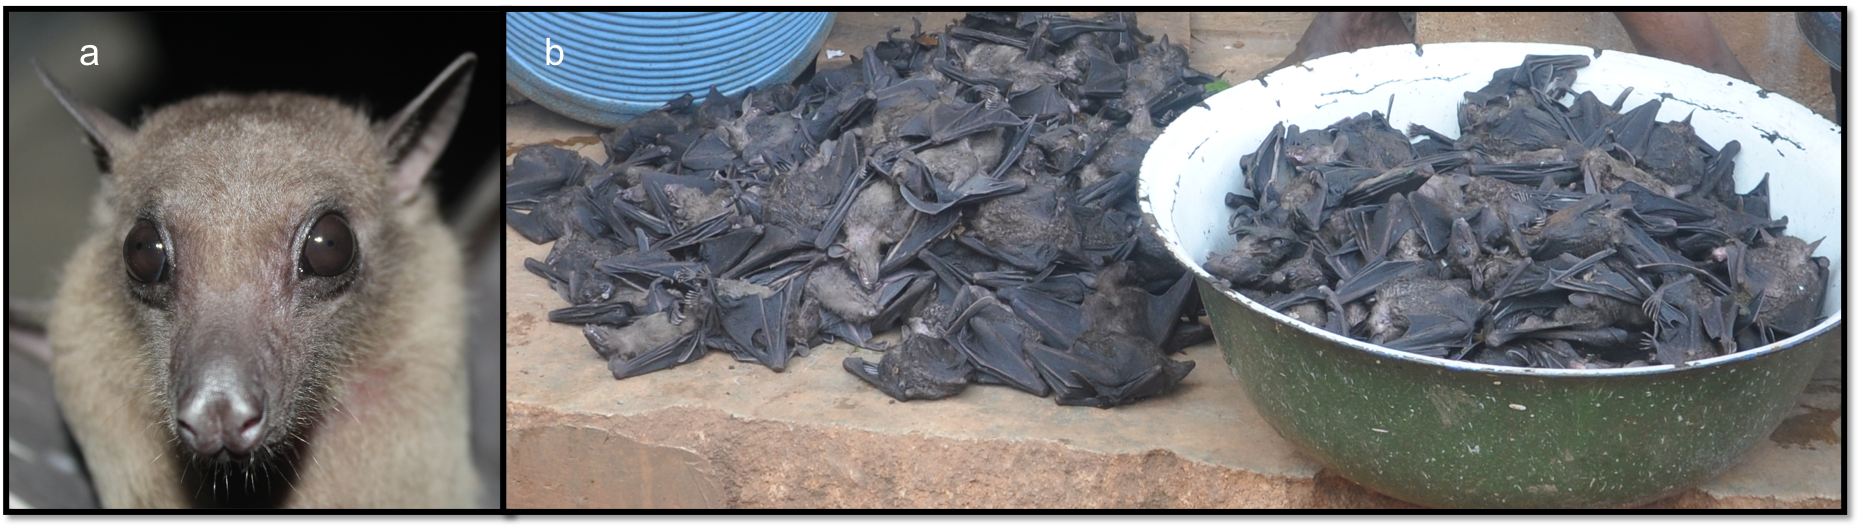 society-for-conservation-biology-priorities-for-conserving-bats-in-nigeria